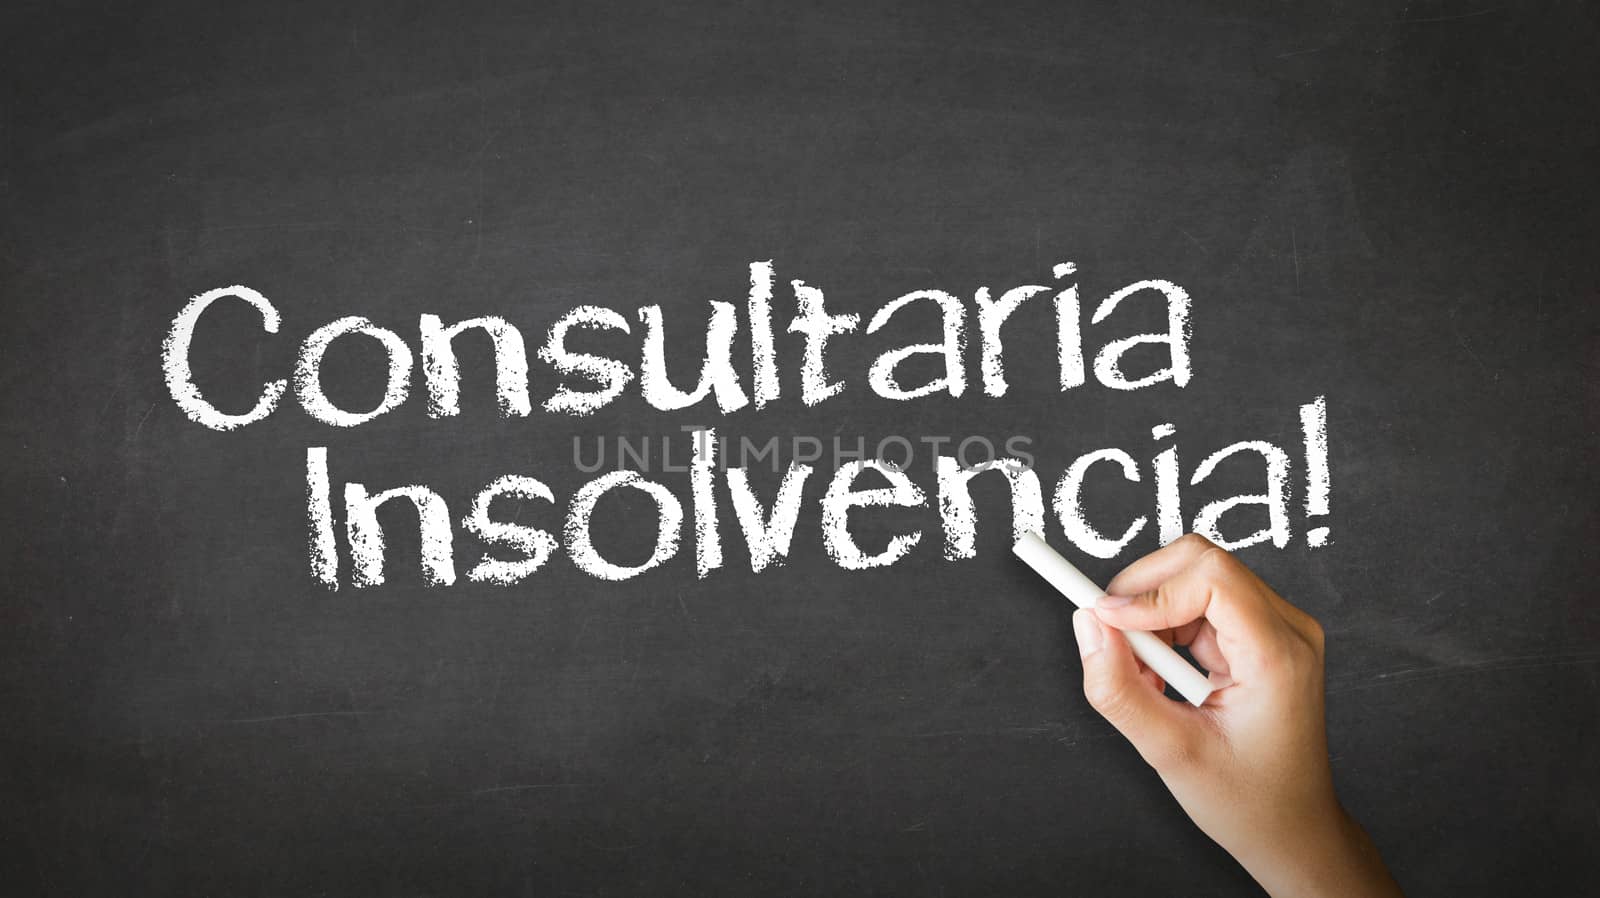 Bankruptcy Consulting (In Spanish) by kbuntu